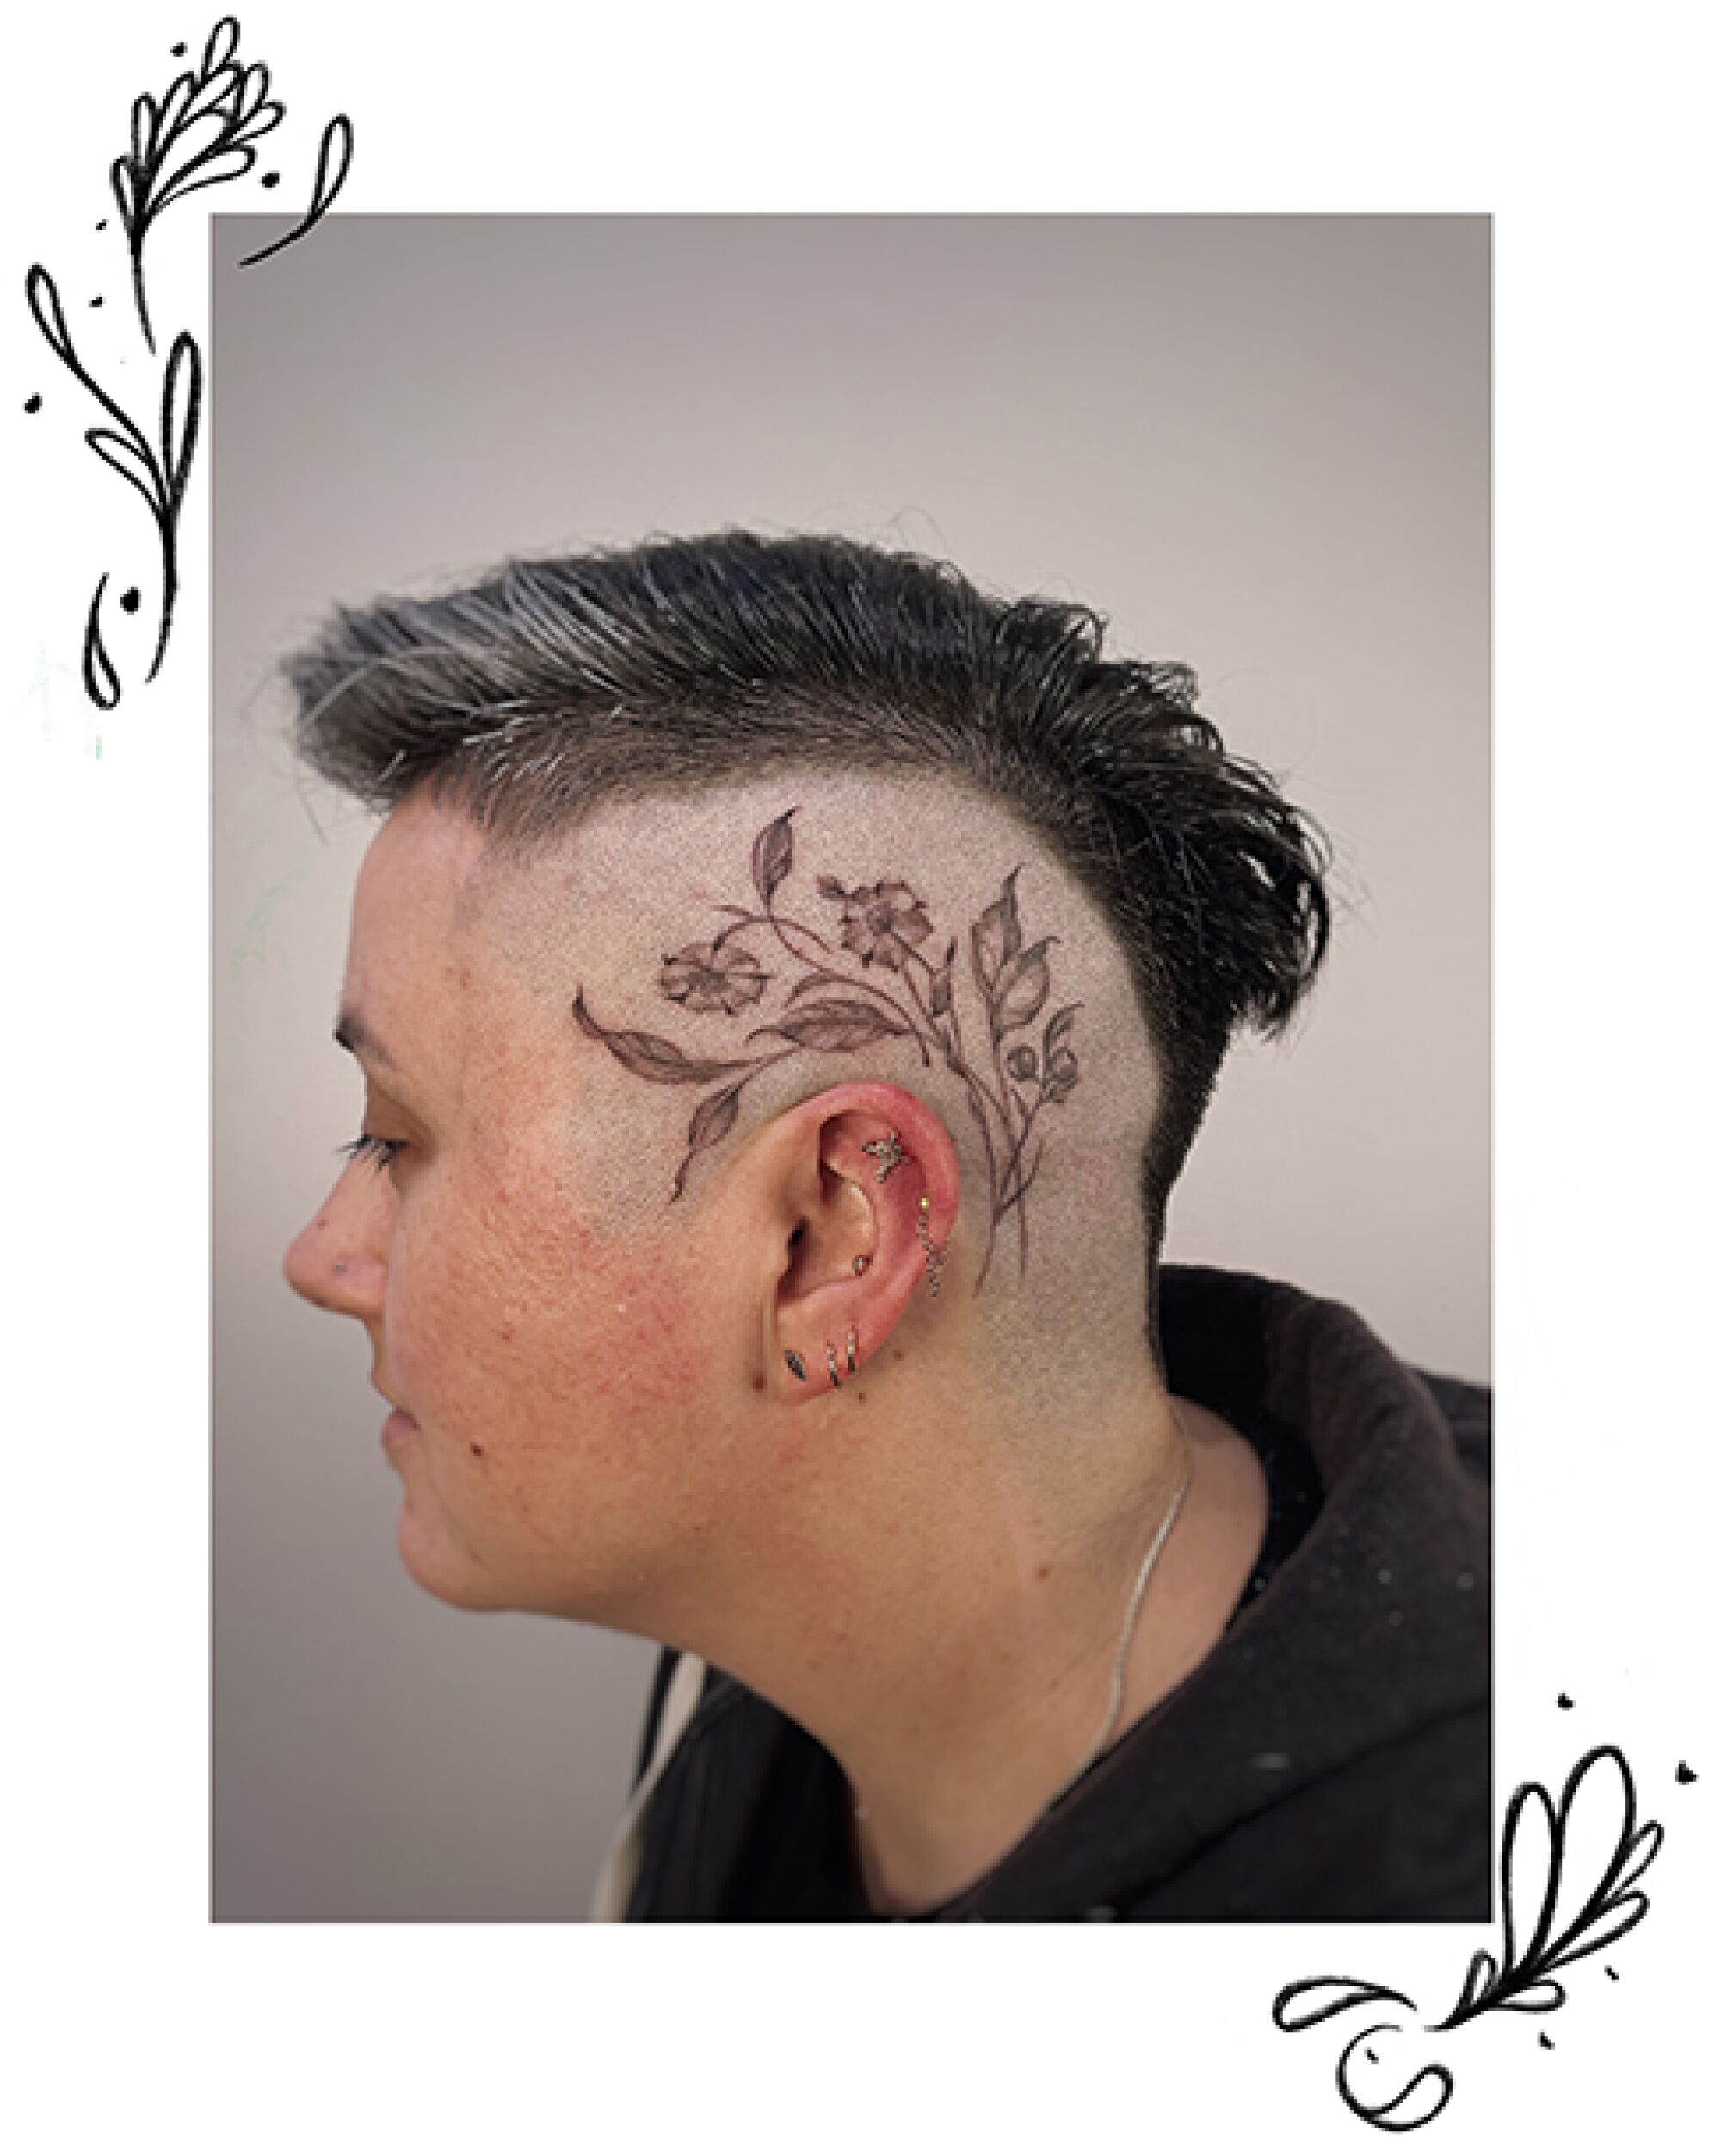 Leaves, flowers tattooed on the side of a head. 